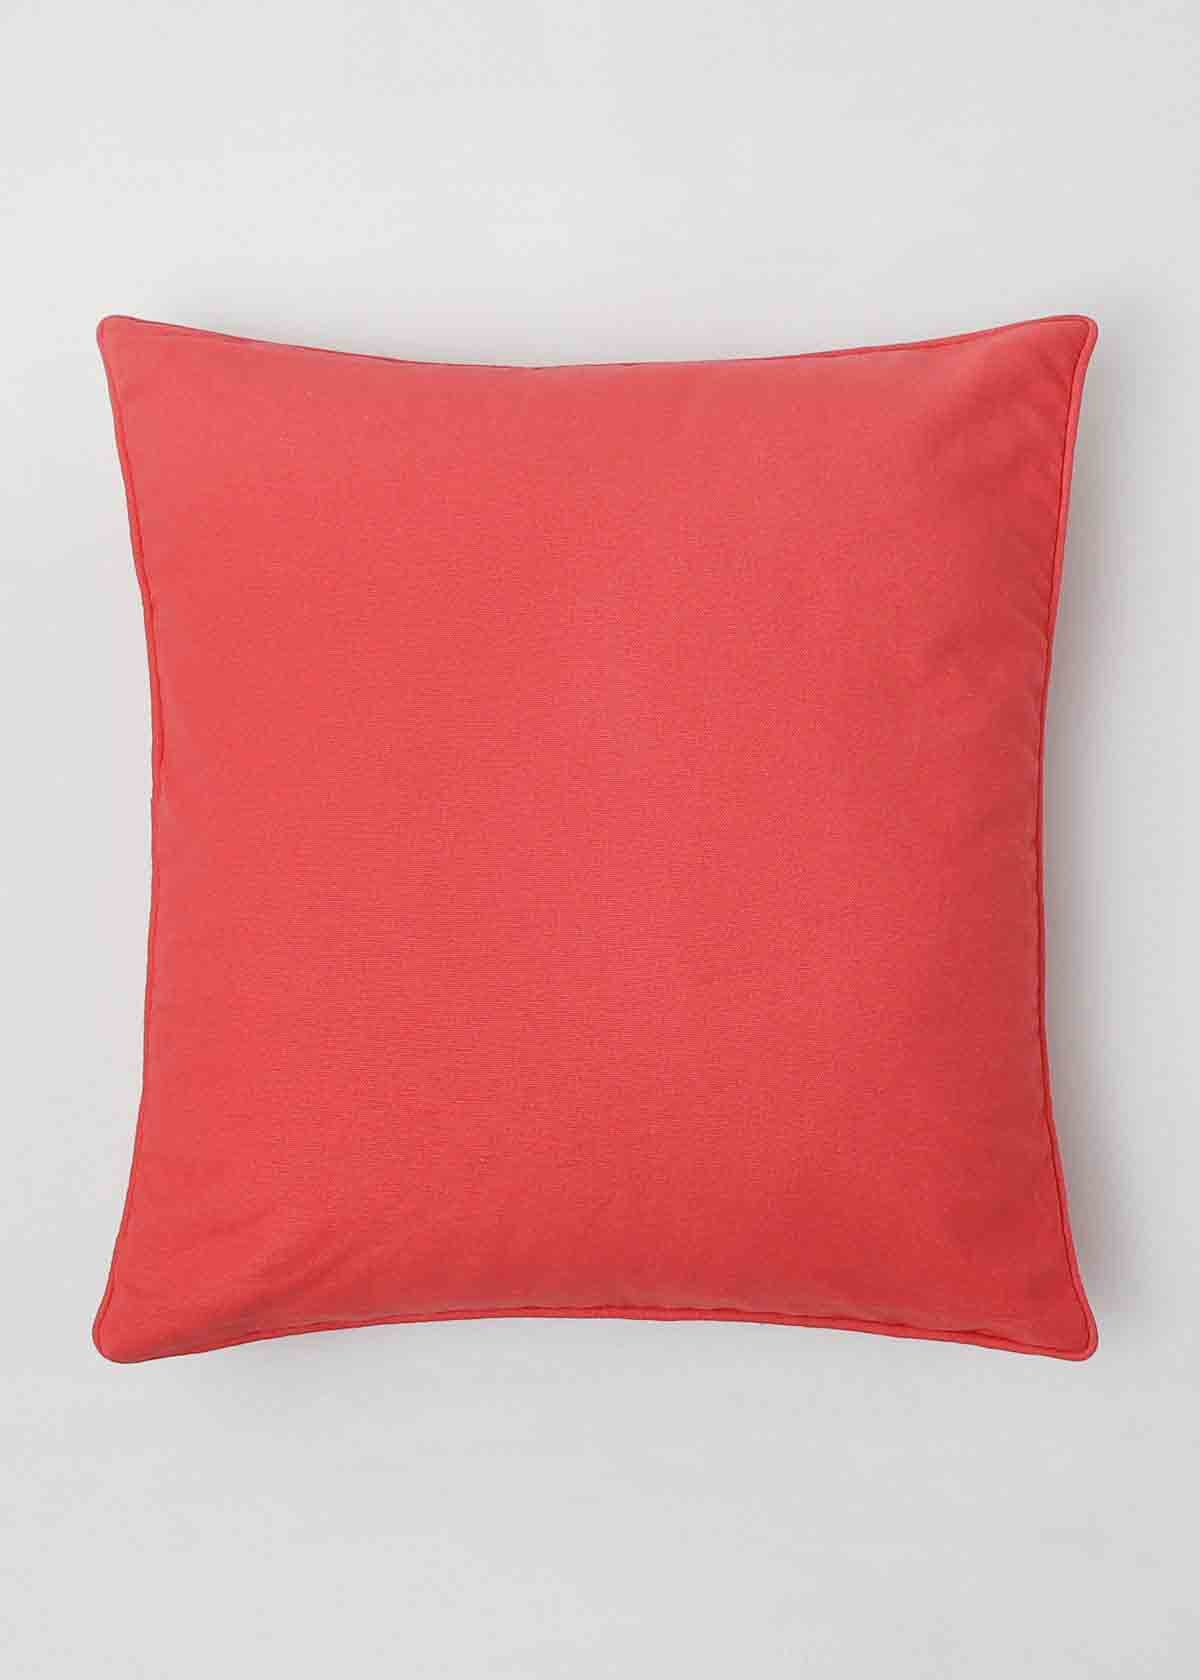 Cherry Red Cushion Cover - Red